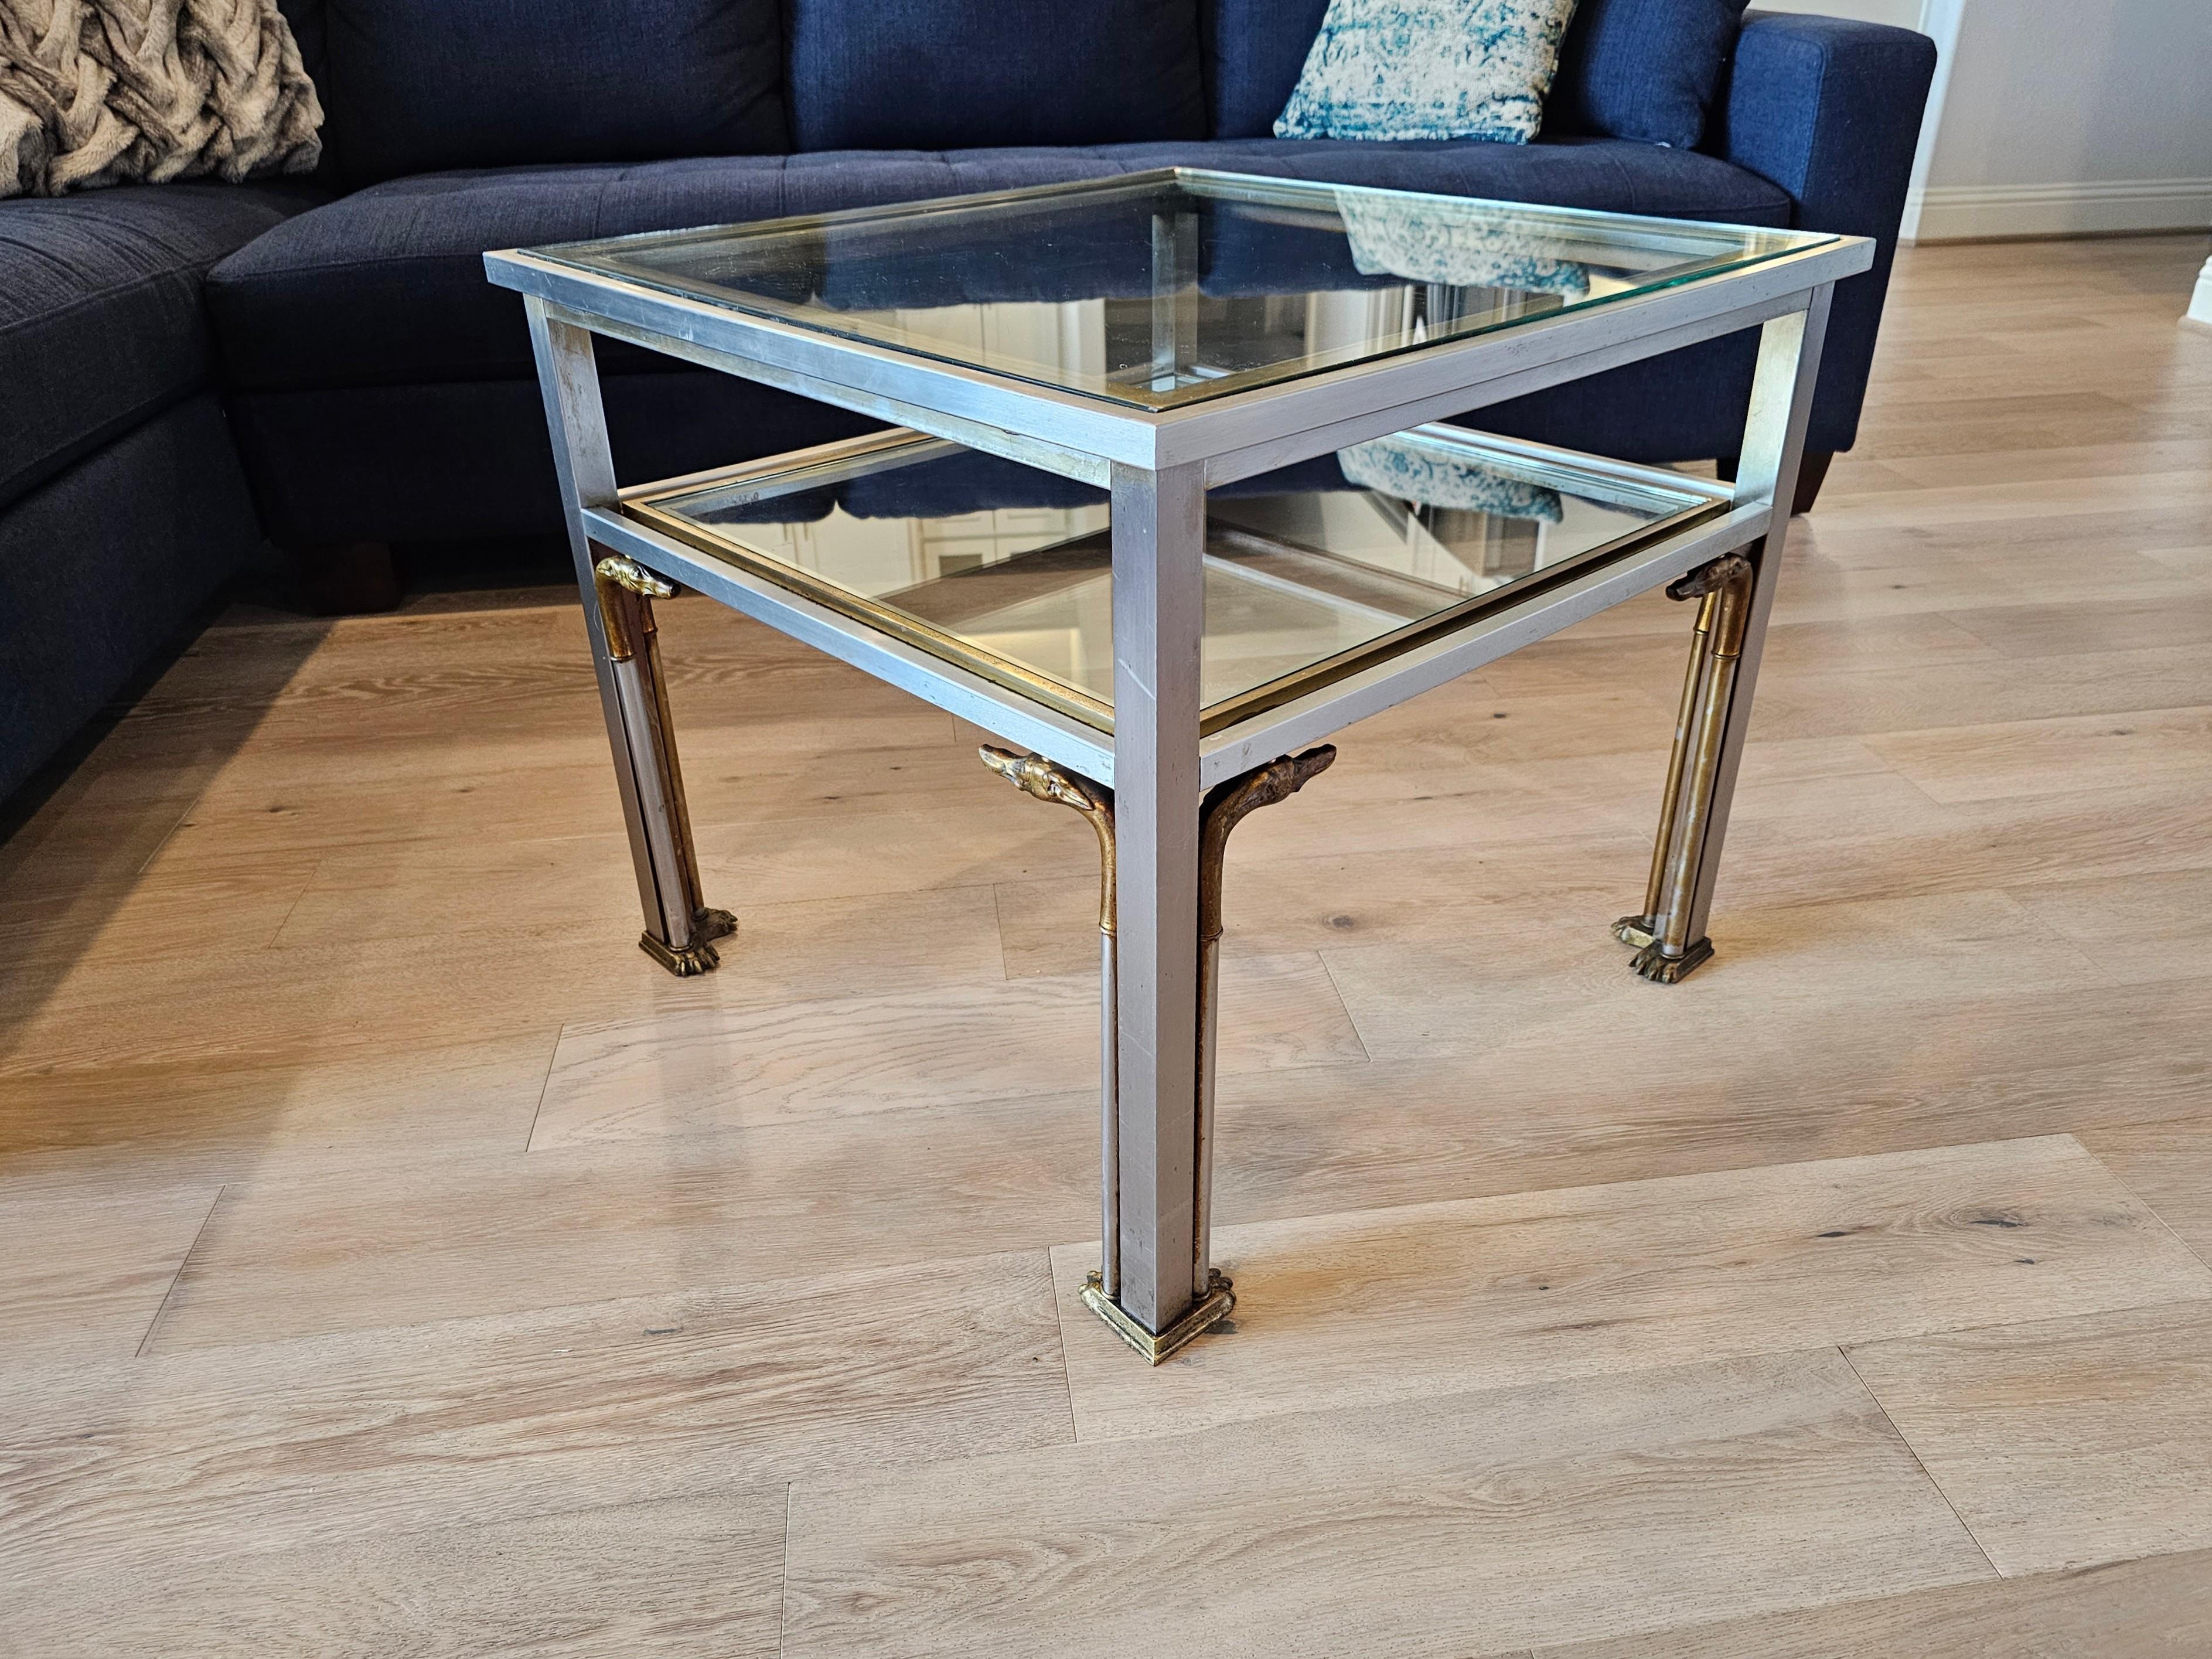 A stunning rare midcentury French mixed metal two-tier table attributed to luxury Parisian design house Maison Jansen (Paris, France; 1880-1989)

Mid-20th Century, having a patinated silver-tone brushed steel frame, gilt metal accents, featuring